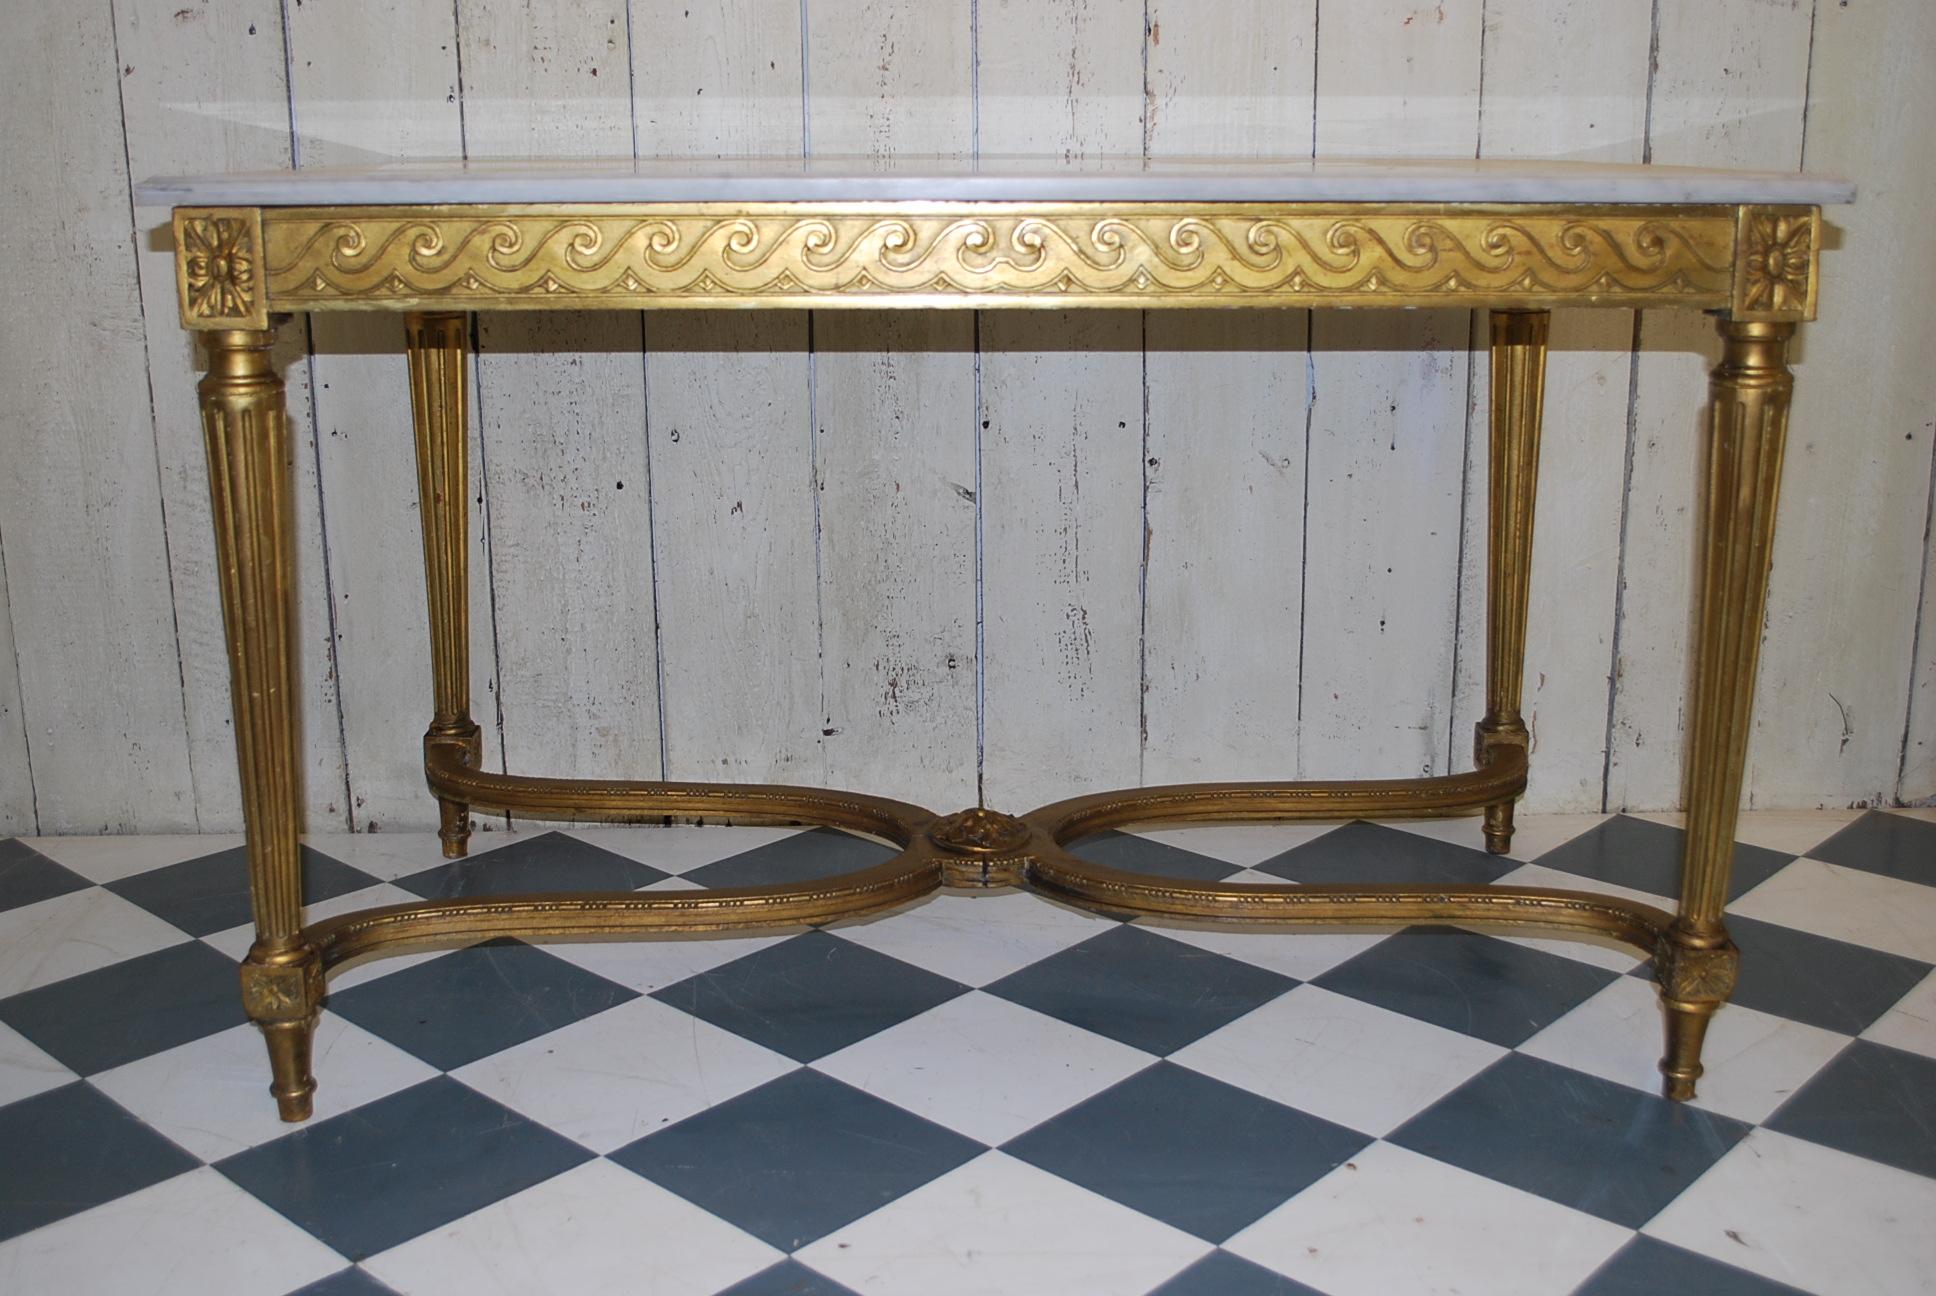 Carved giltwood French Napoleon III centre table, with Carrara marble top. Embellished with a carved wave decoration that runs all the way around the frieze. The turned legs that taper down with fluting, are united by shaped stretchers with a carved